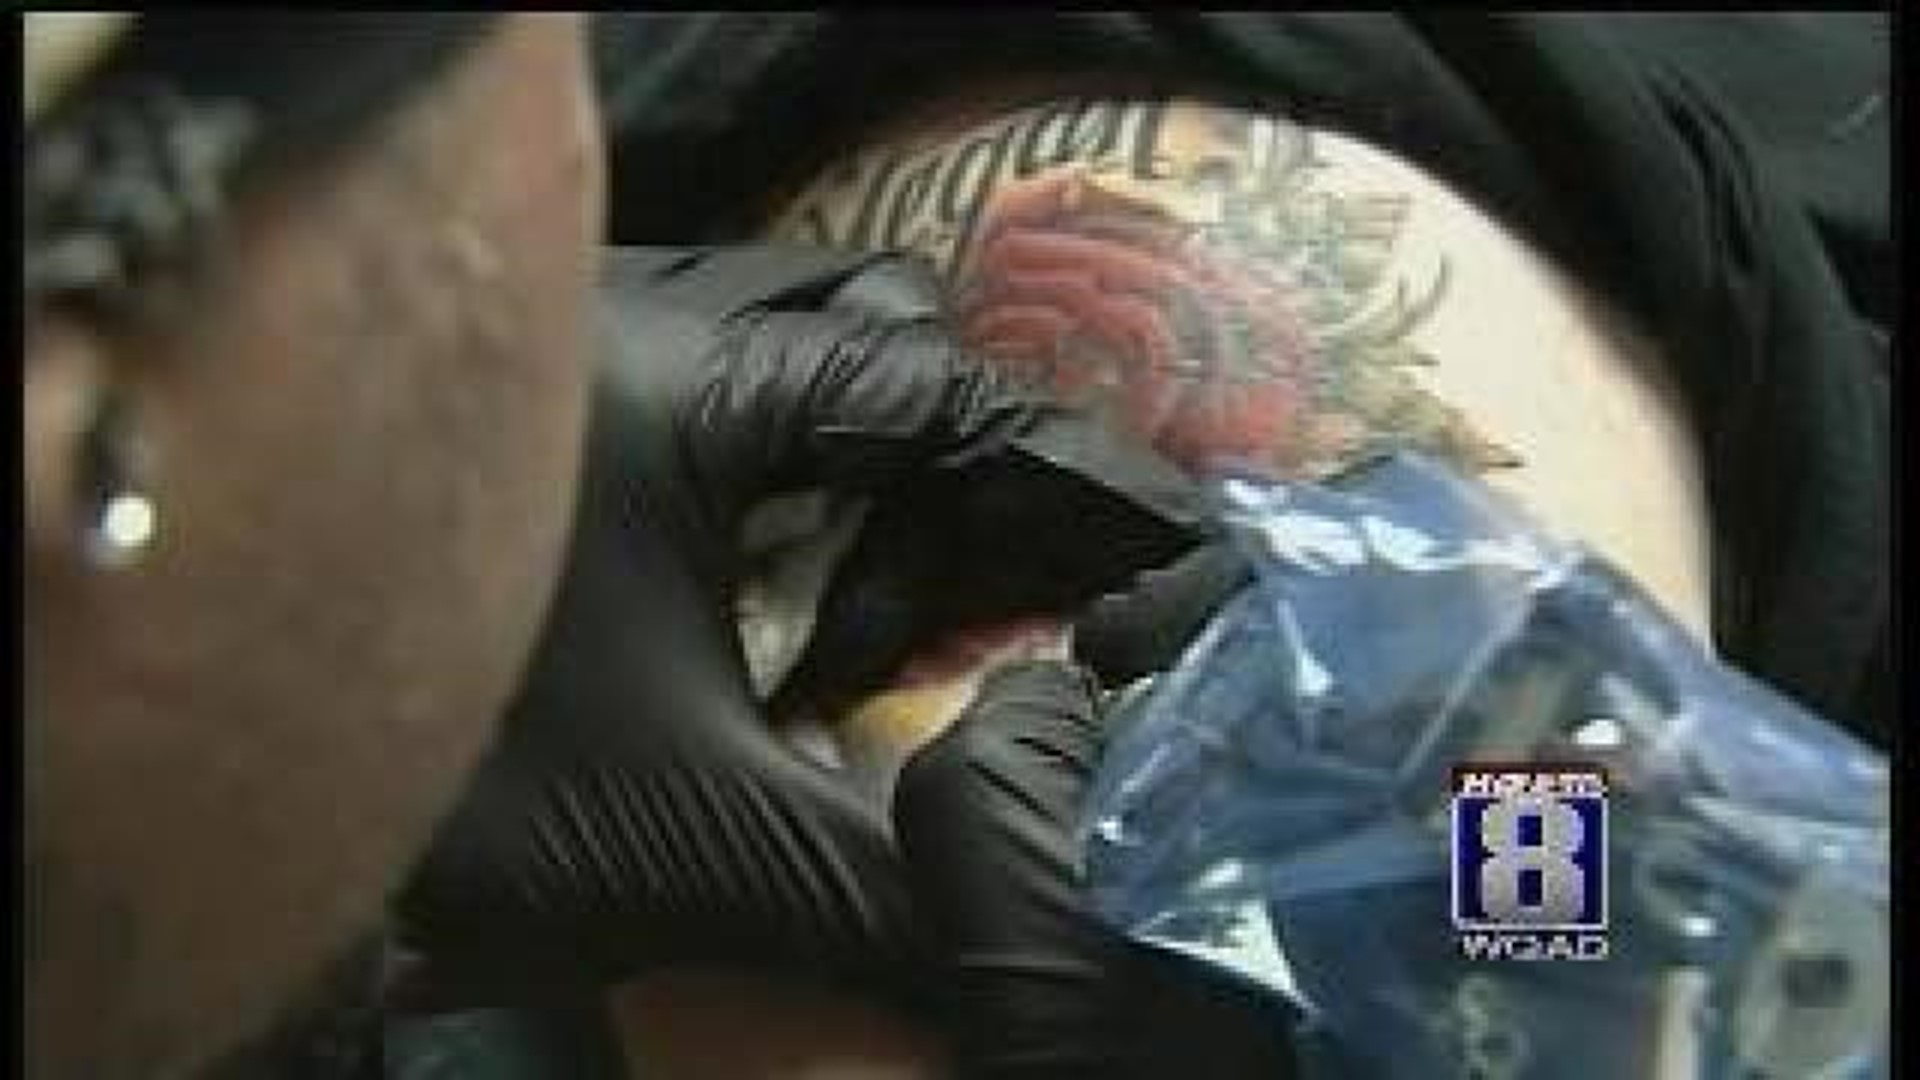 Legal age for tattoos lowered